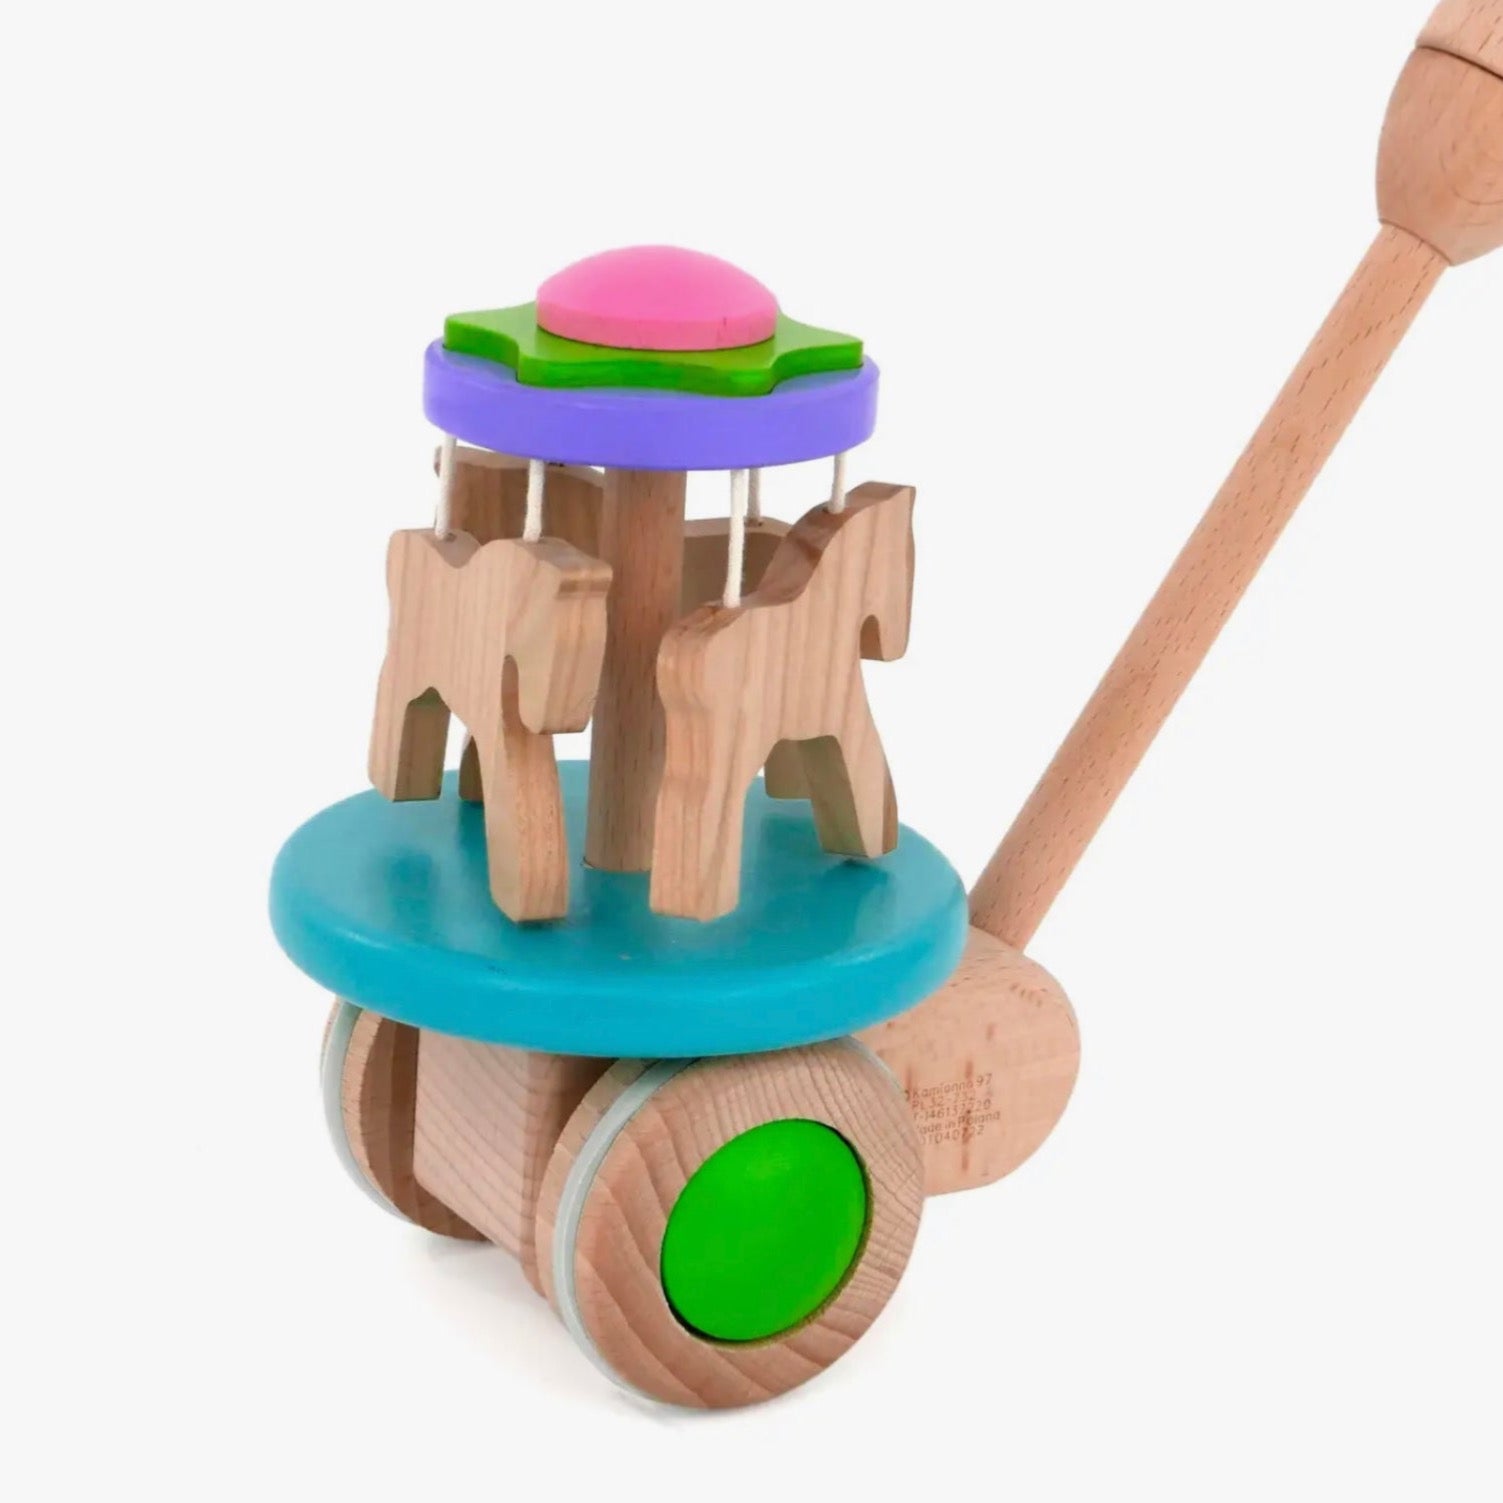 Wooden Carousel Push Toy by Bajo